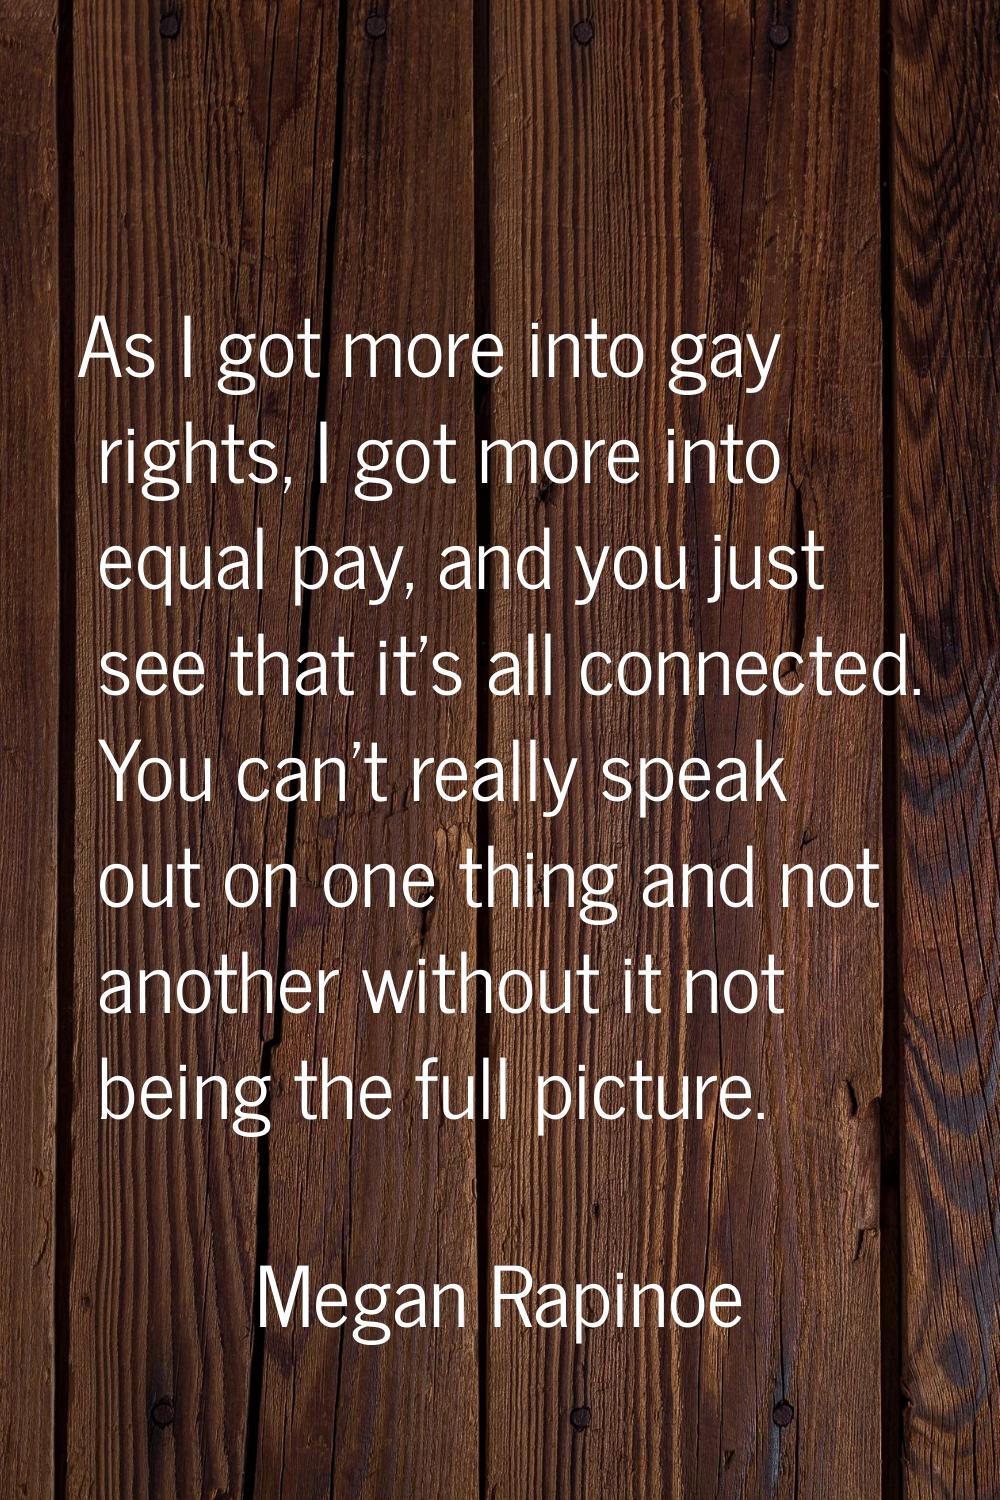 As I got more into gay rights, I got more into equal pay, and you just see that it's all connected.